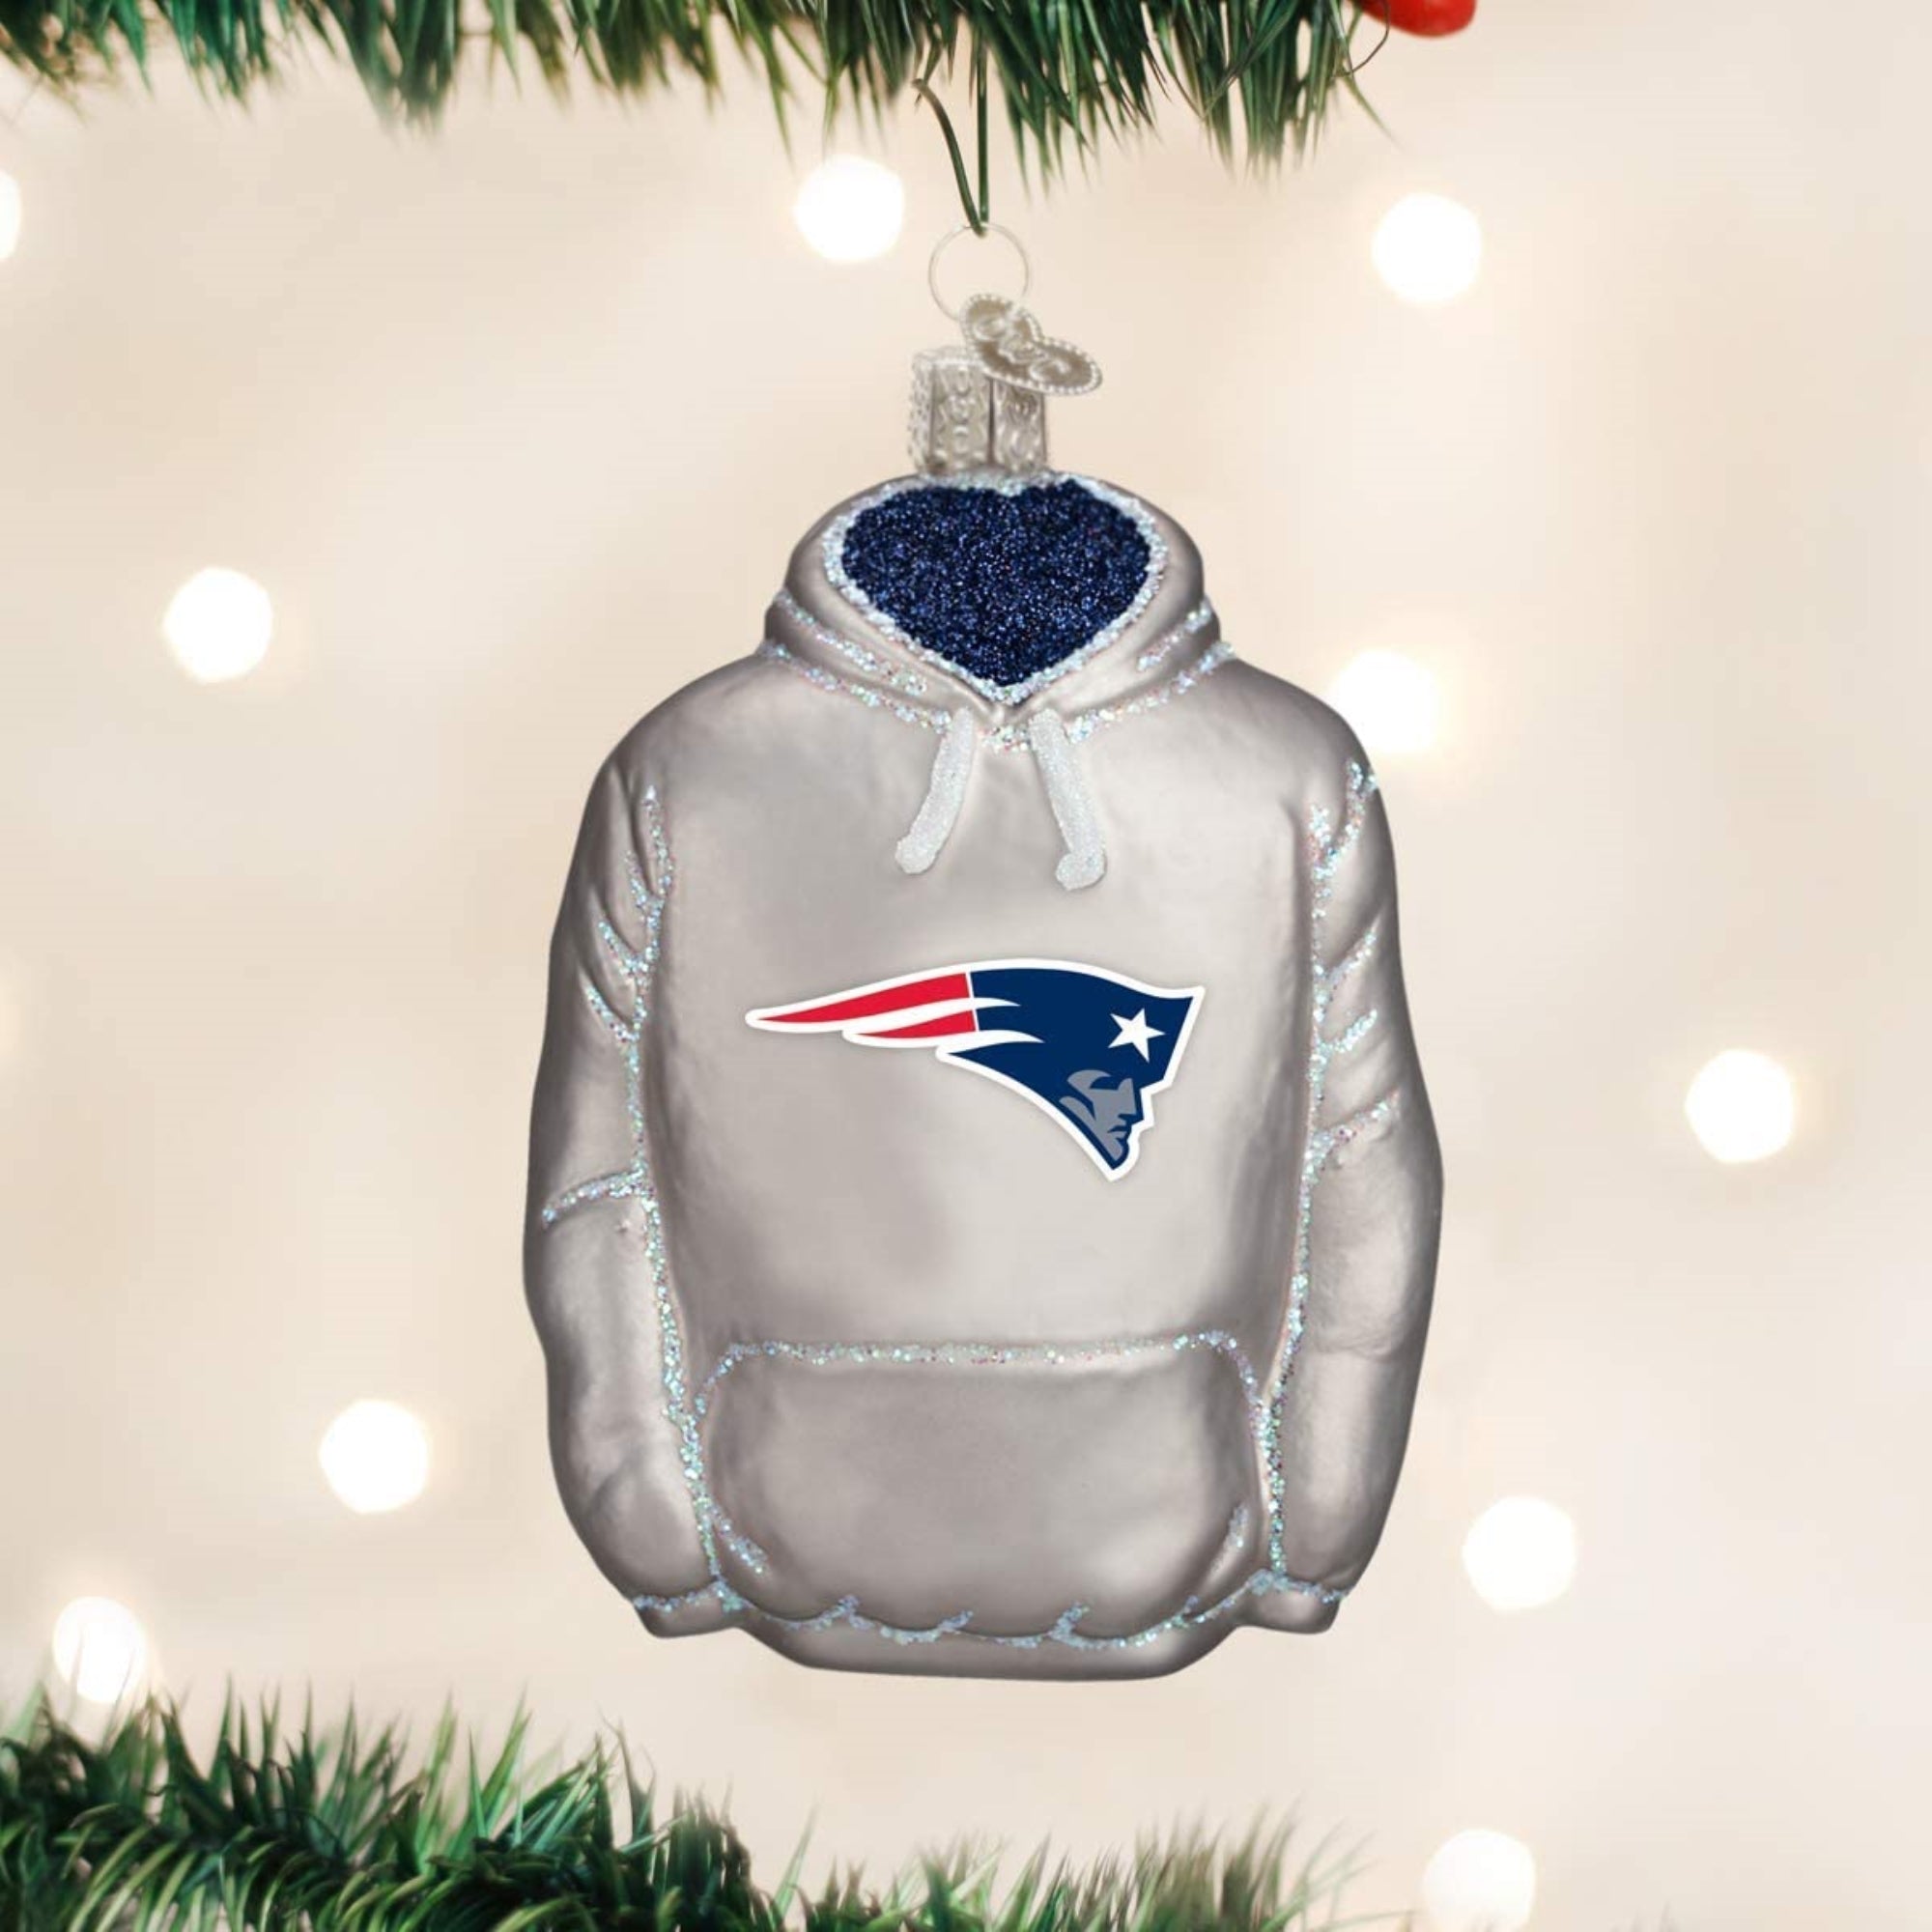 Old World Christmas New England Patriots Hoodie Ornament For Christmas Tree